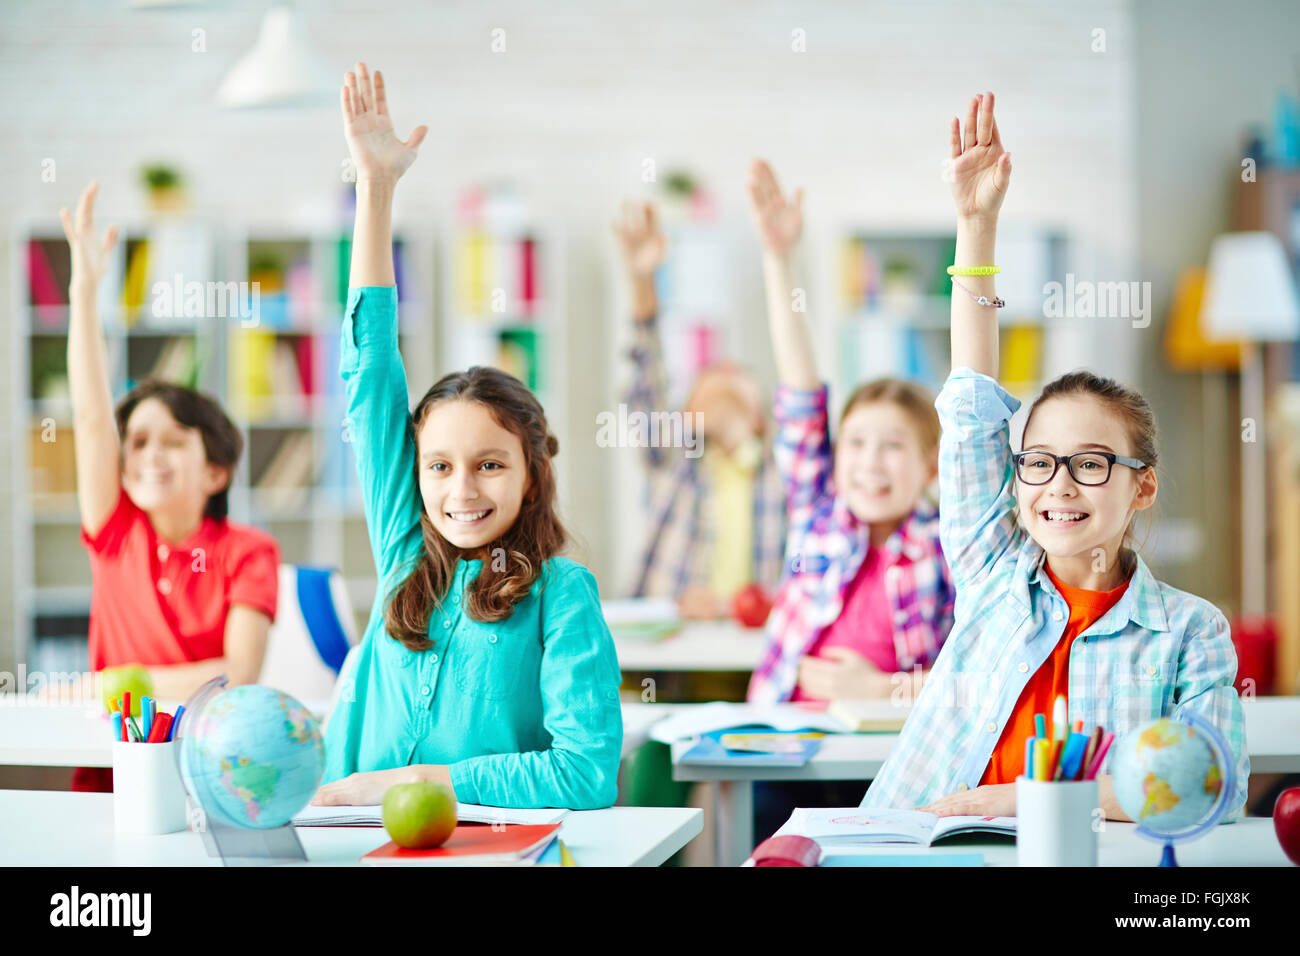 happy-pupils-sitting-by-desks-and-raising-hands-at-lesson-FGJX8K.jpg